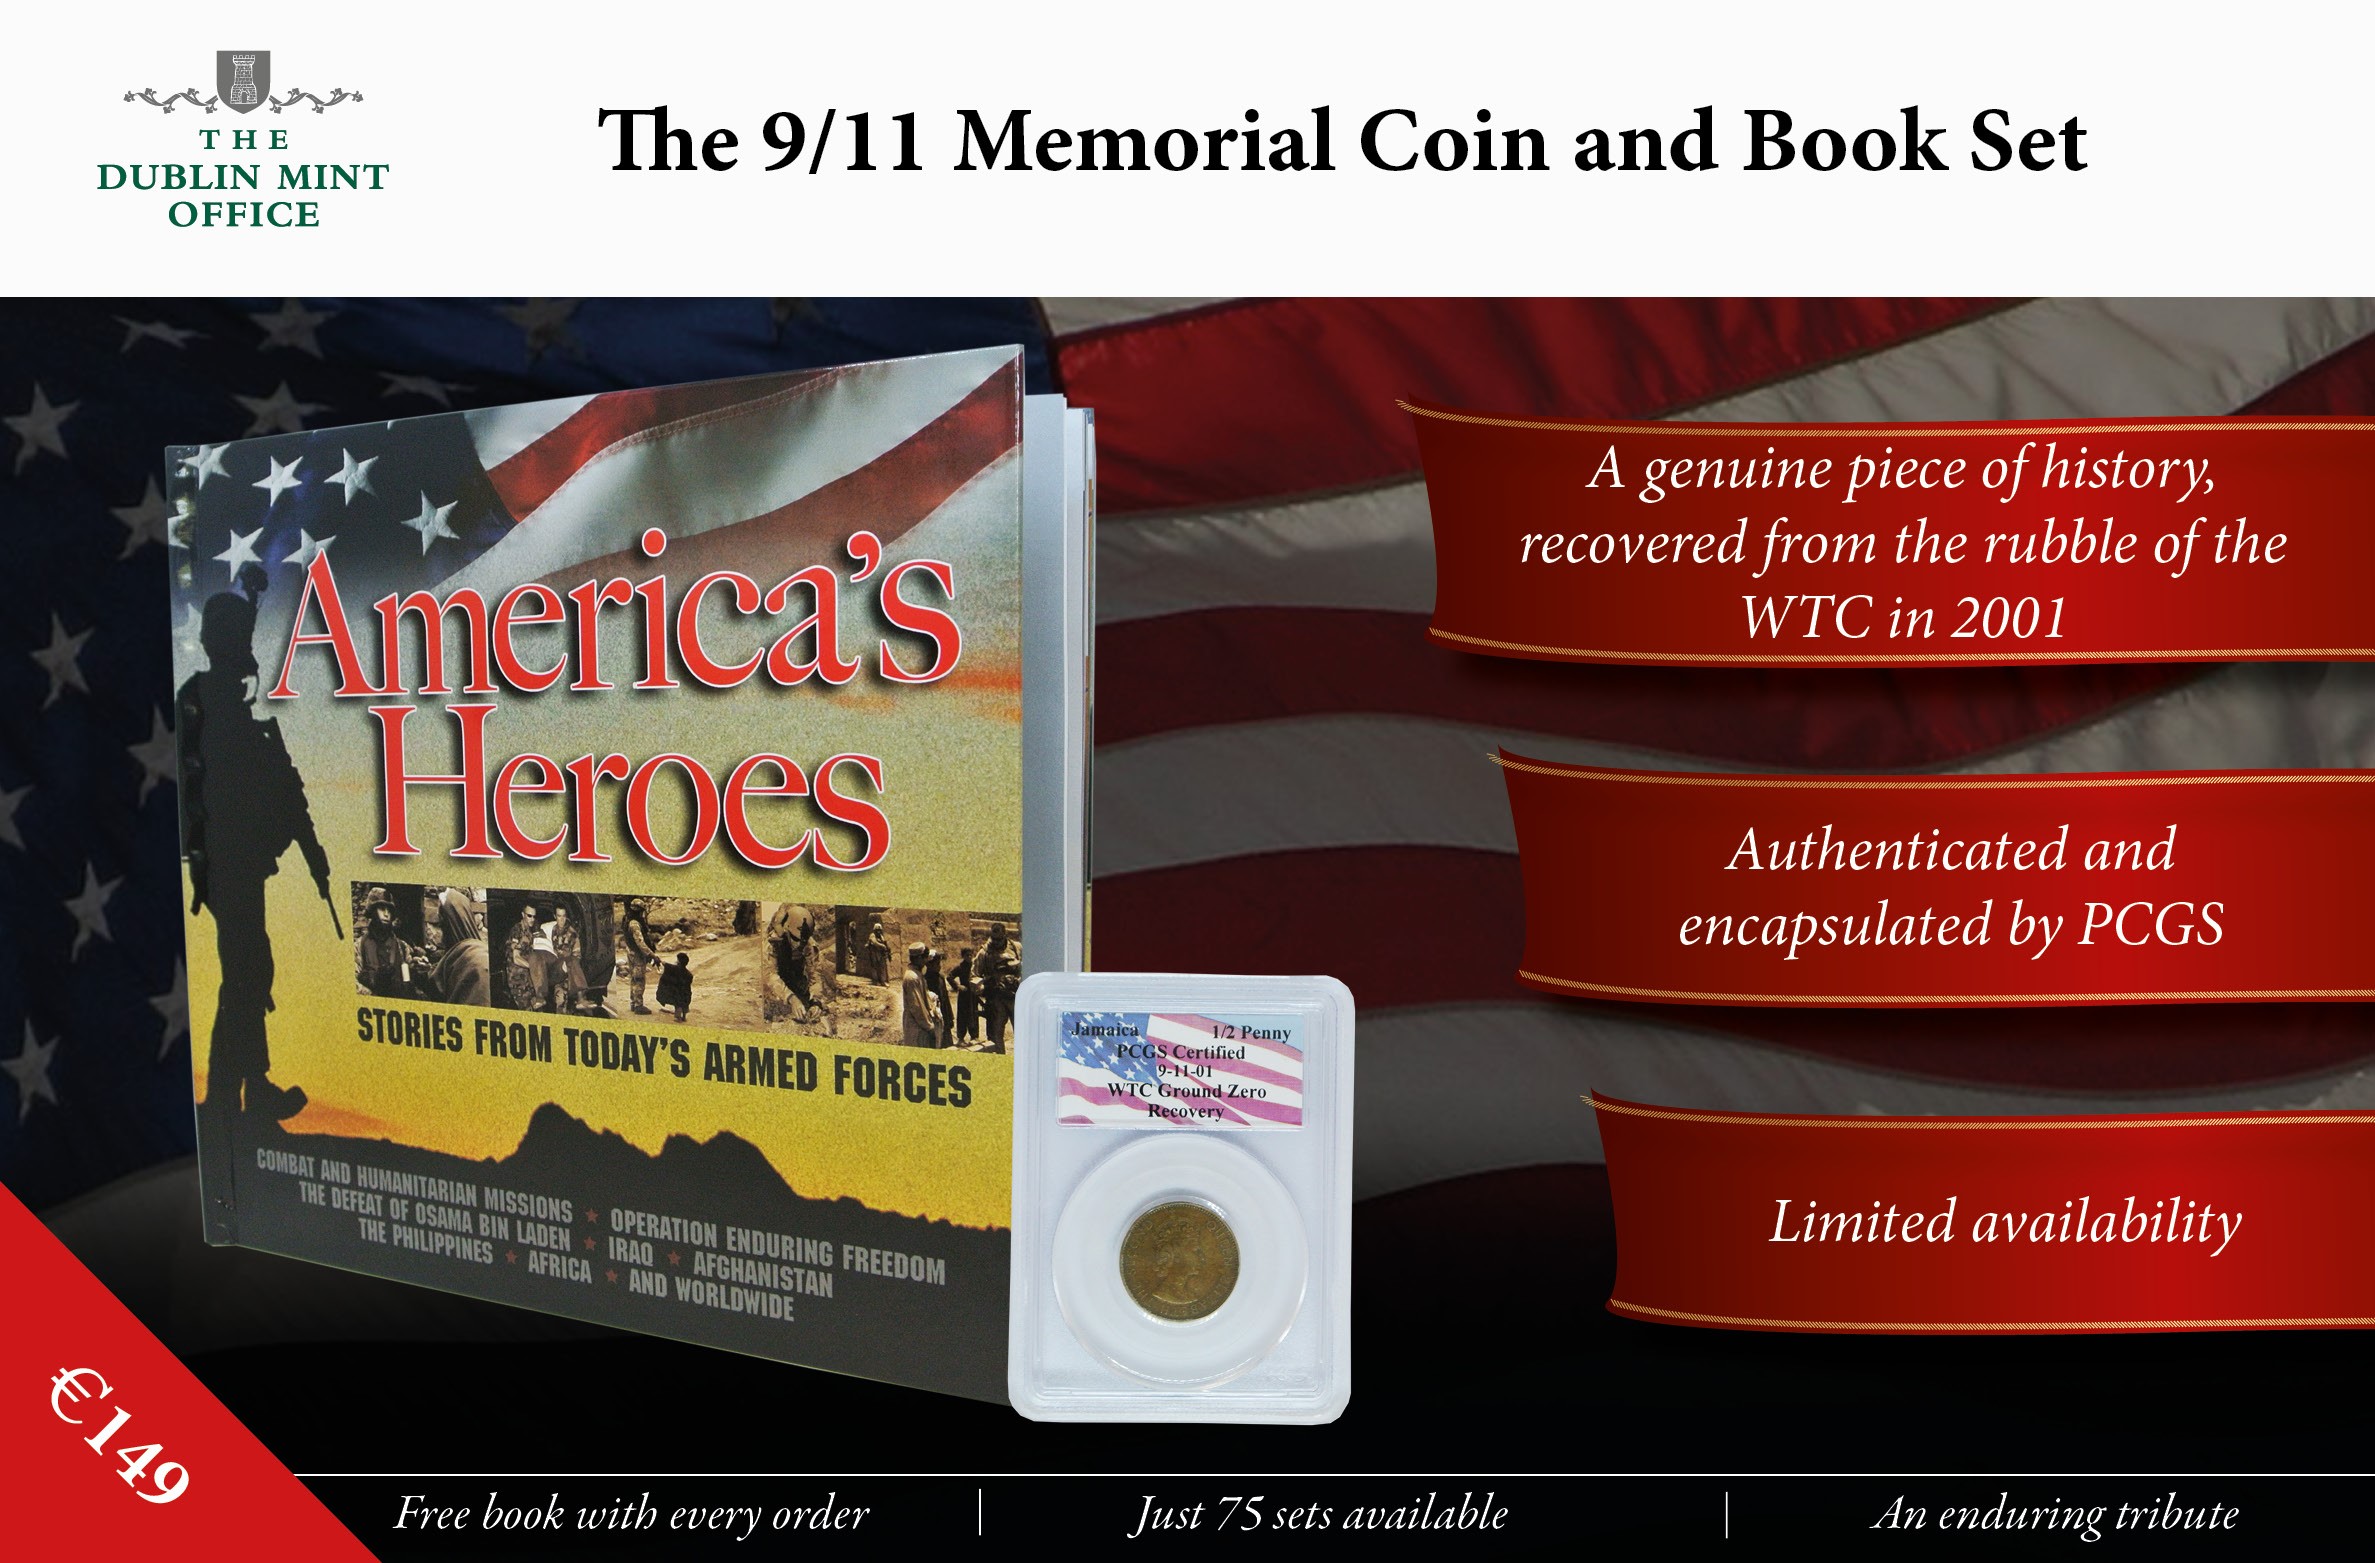 The 9/11 Memorial Coin and Book Set